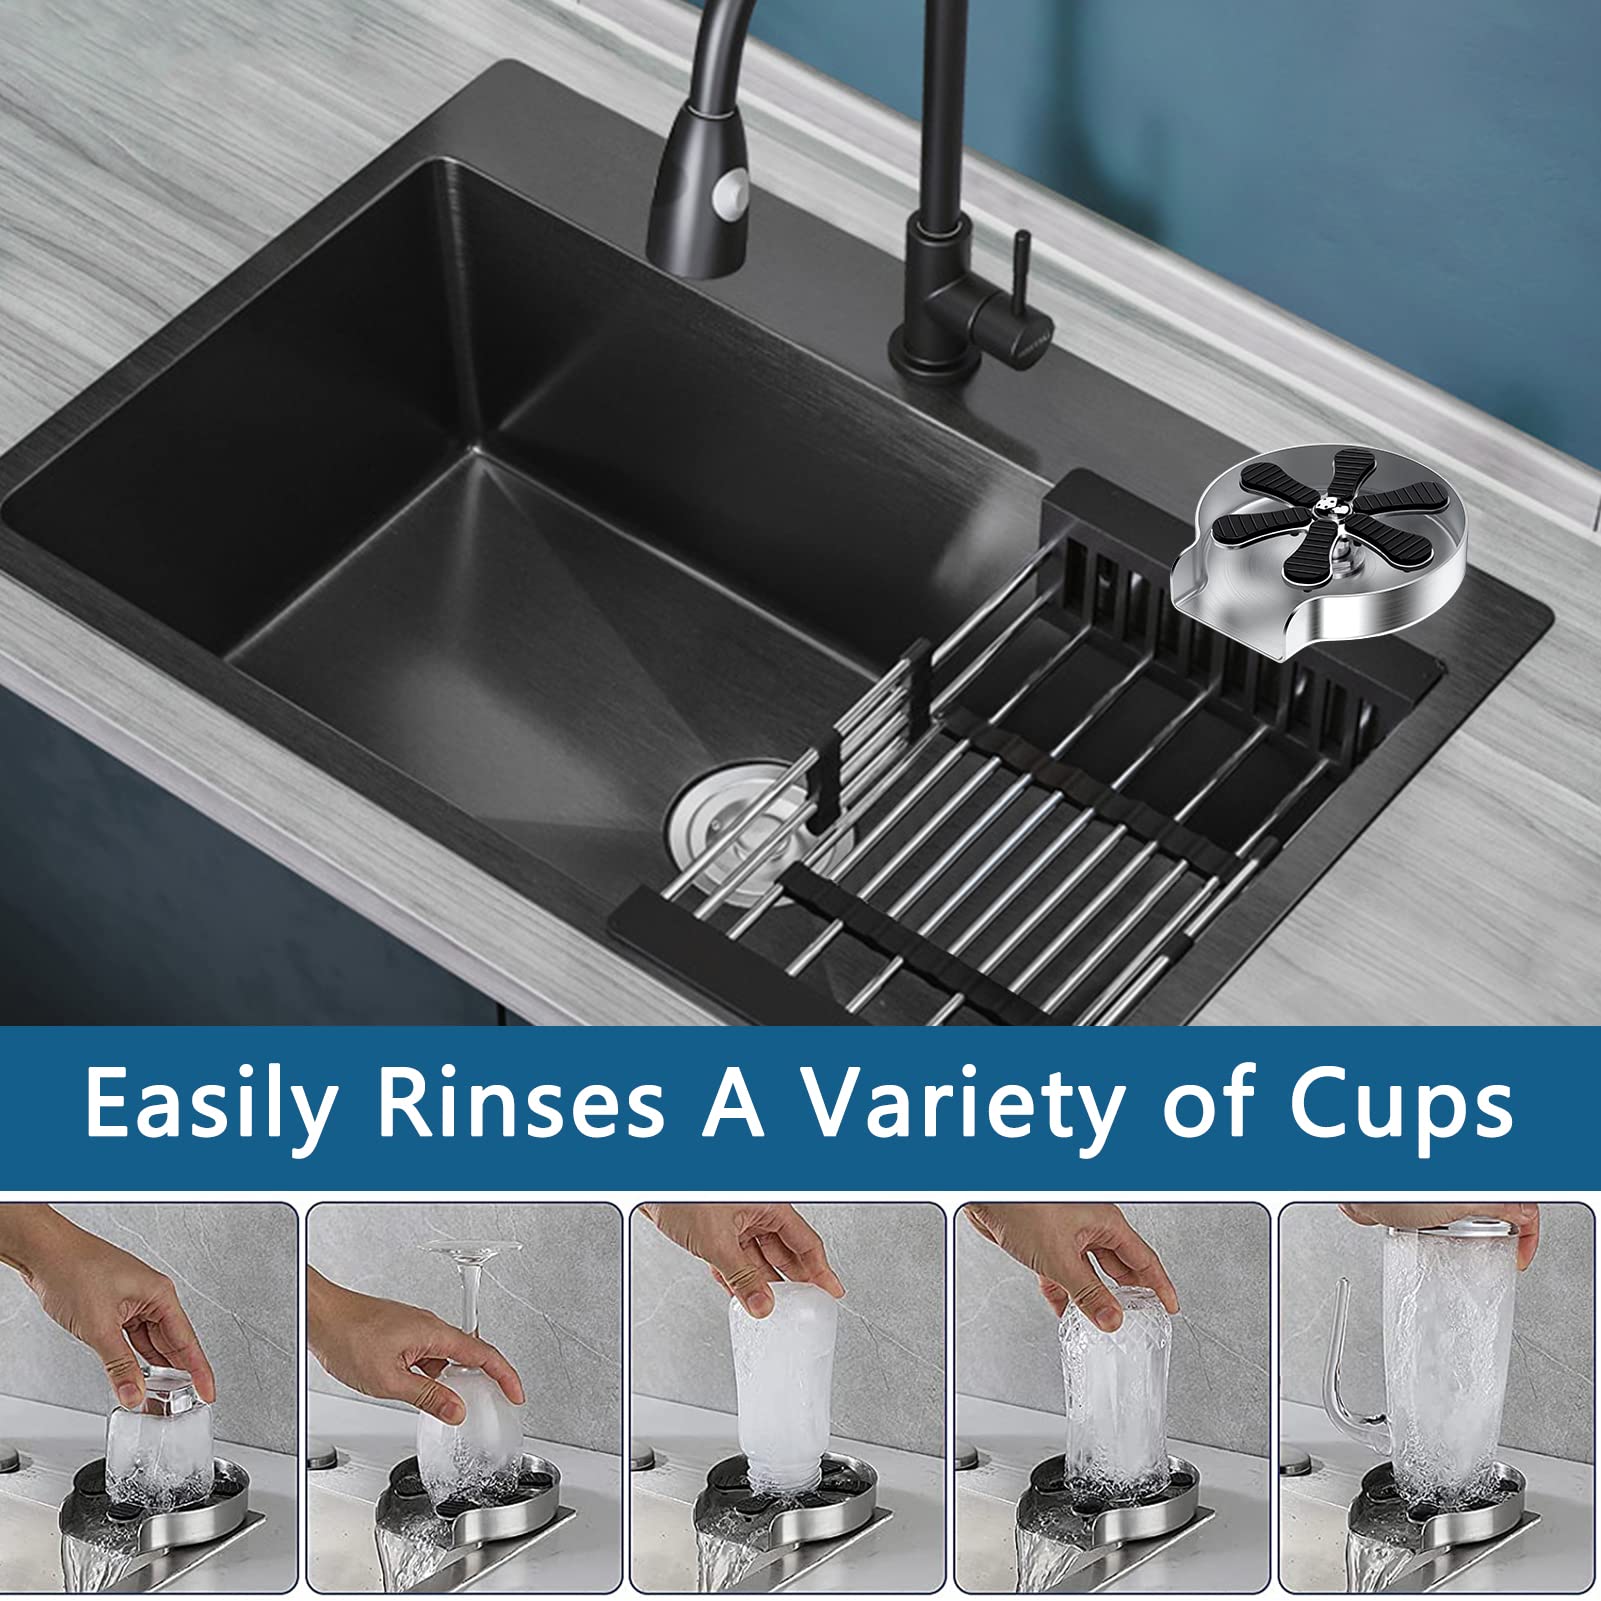 KAGM Glass Rinser for Kitchen Sink, Faucet Glass Washer Cleaner Accessories, Stainless Steel Bar Cup Cleaner for Sink Cup Bottle Washer Kitchen Sink Accessories